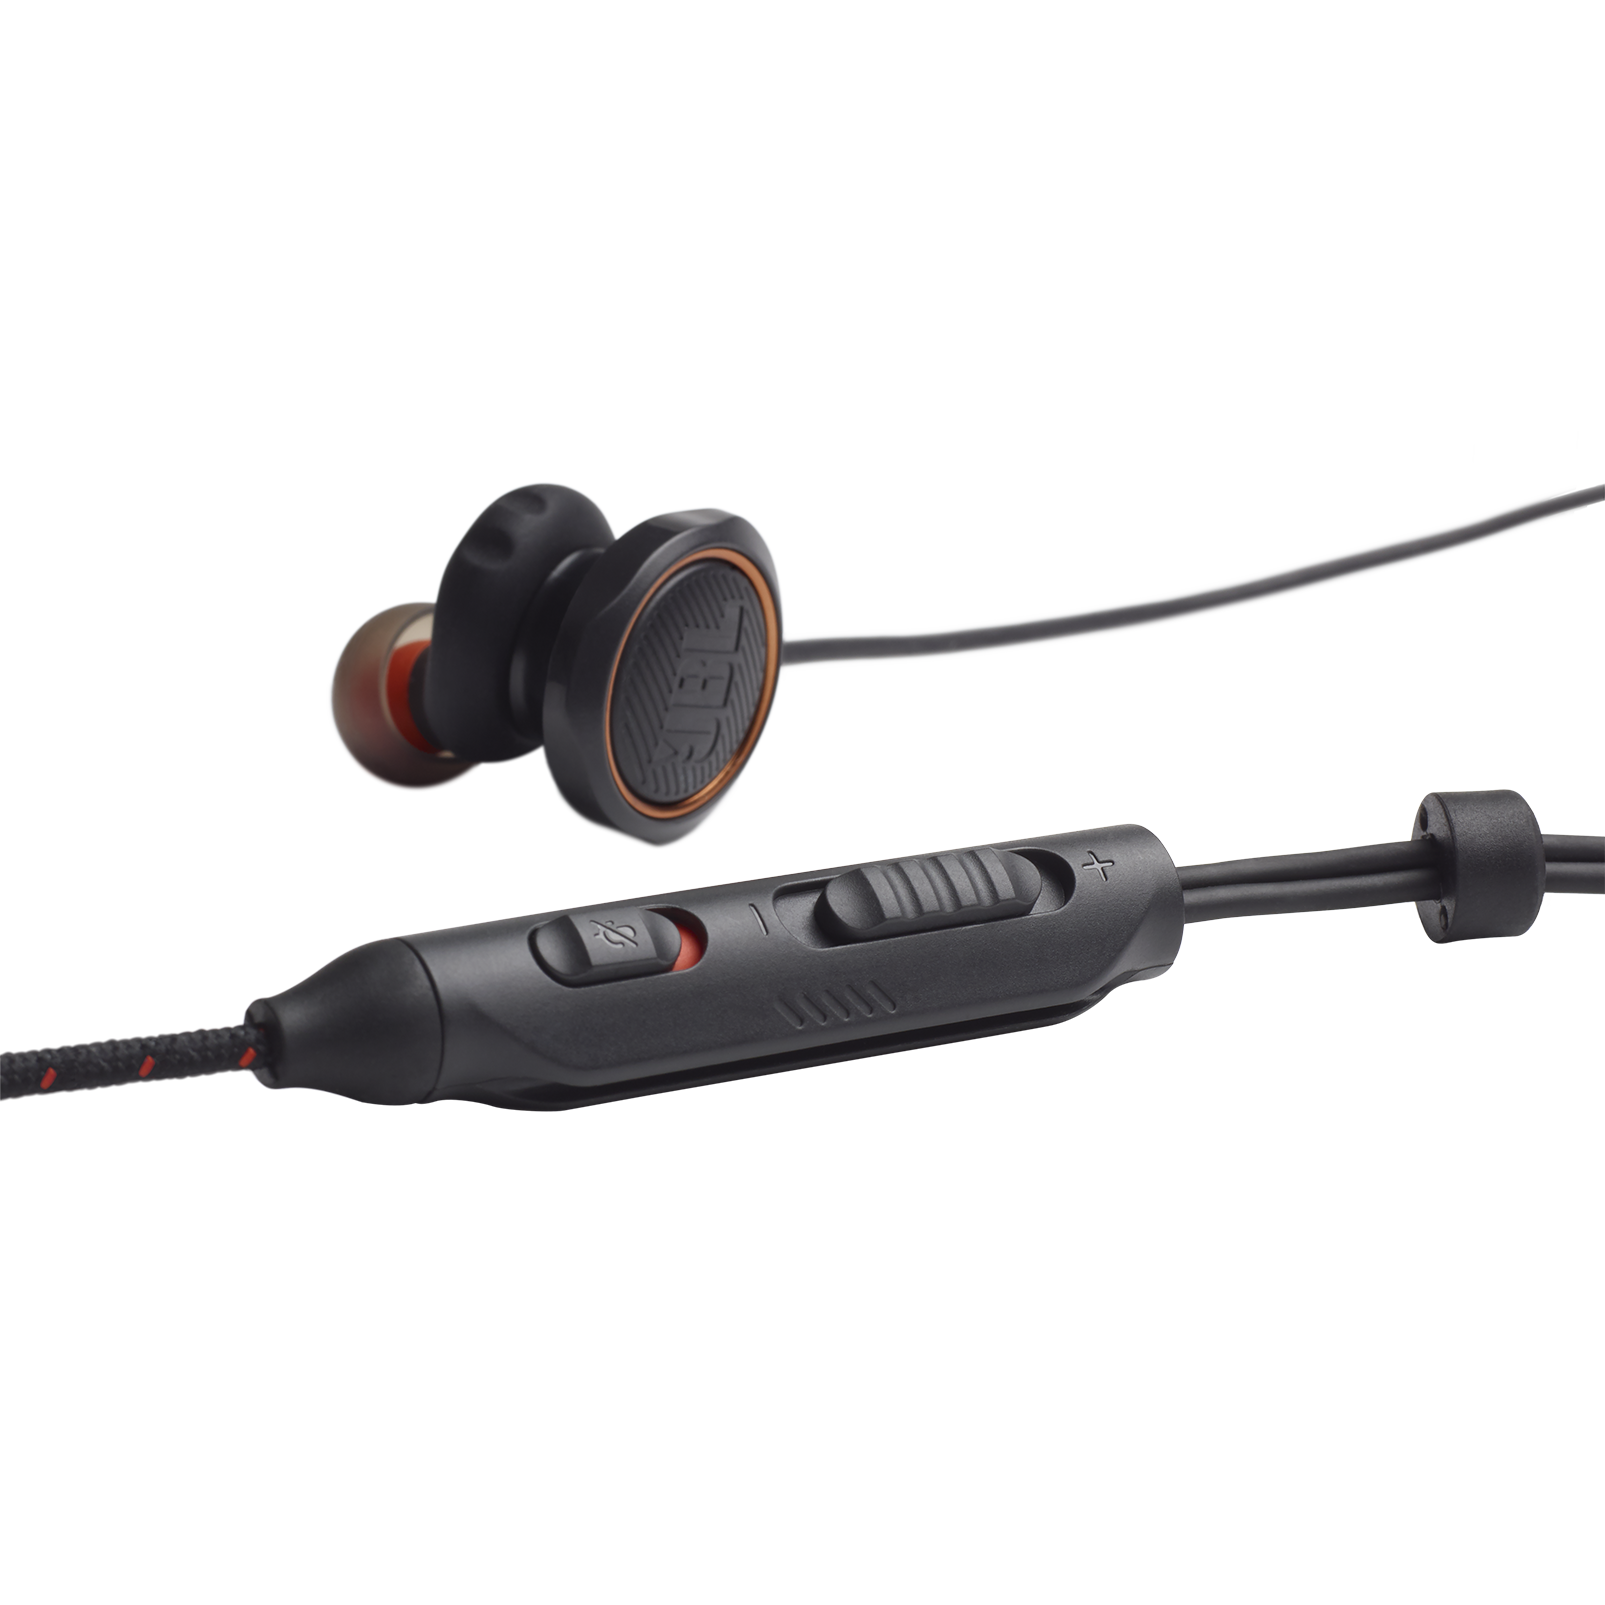 JBL Quantum 50 - Black - Wired in-ear gaming headset with volume slider and mic mute - Detailshot 1